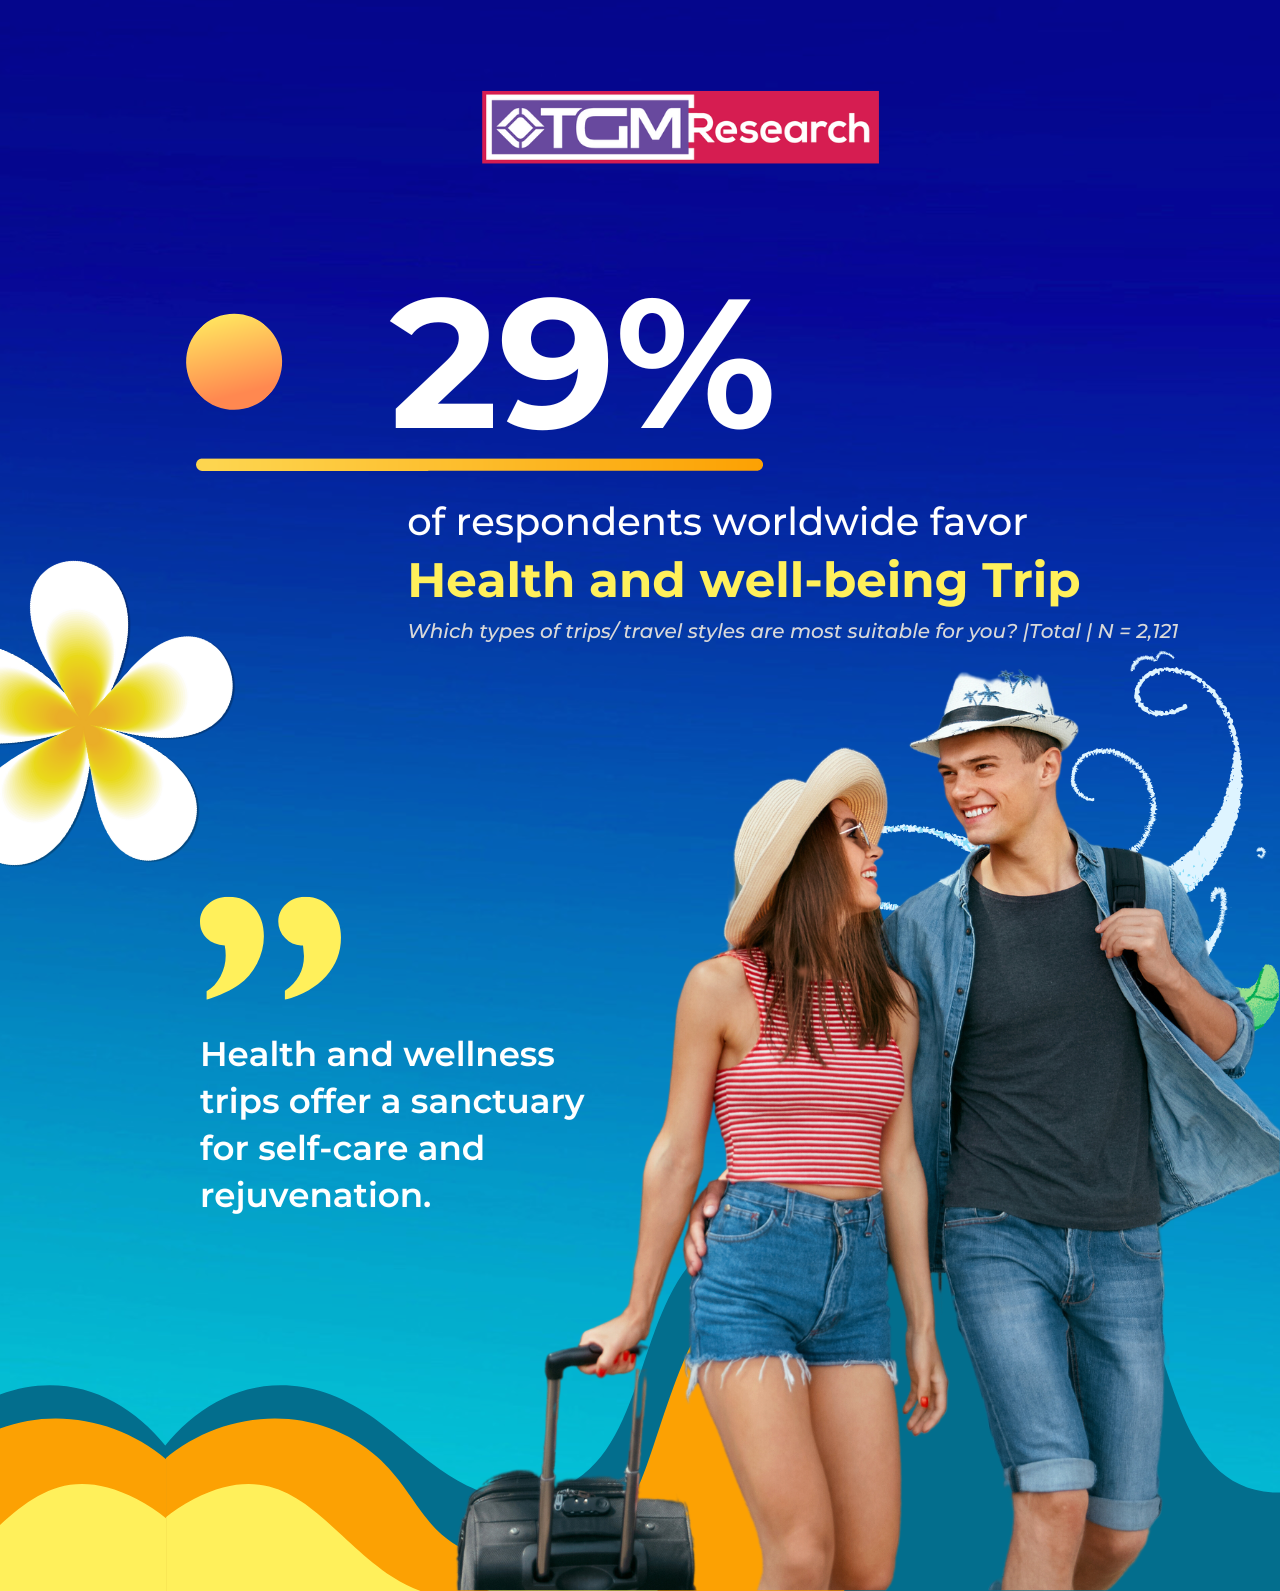 29% of respondents worldwide favor Health and well-being trips